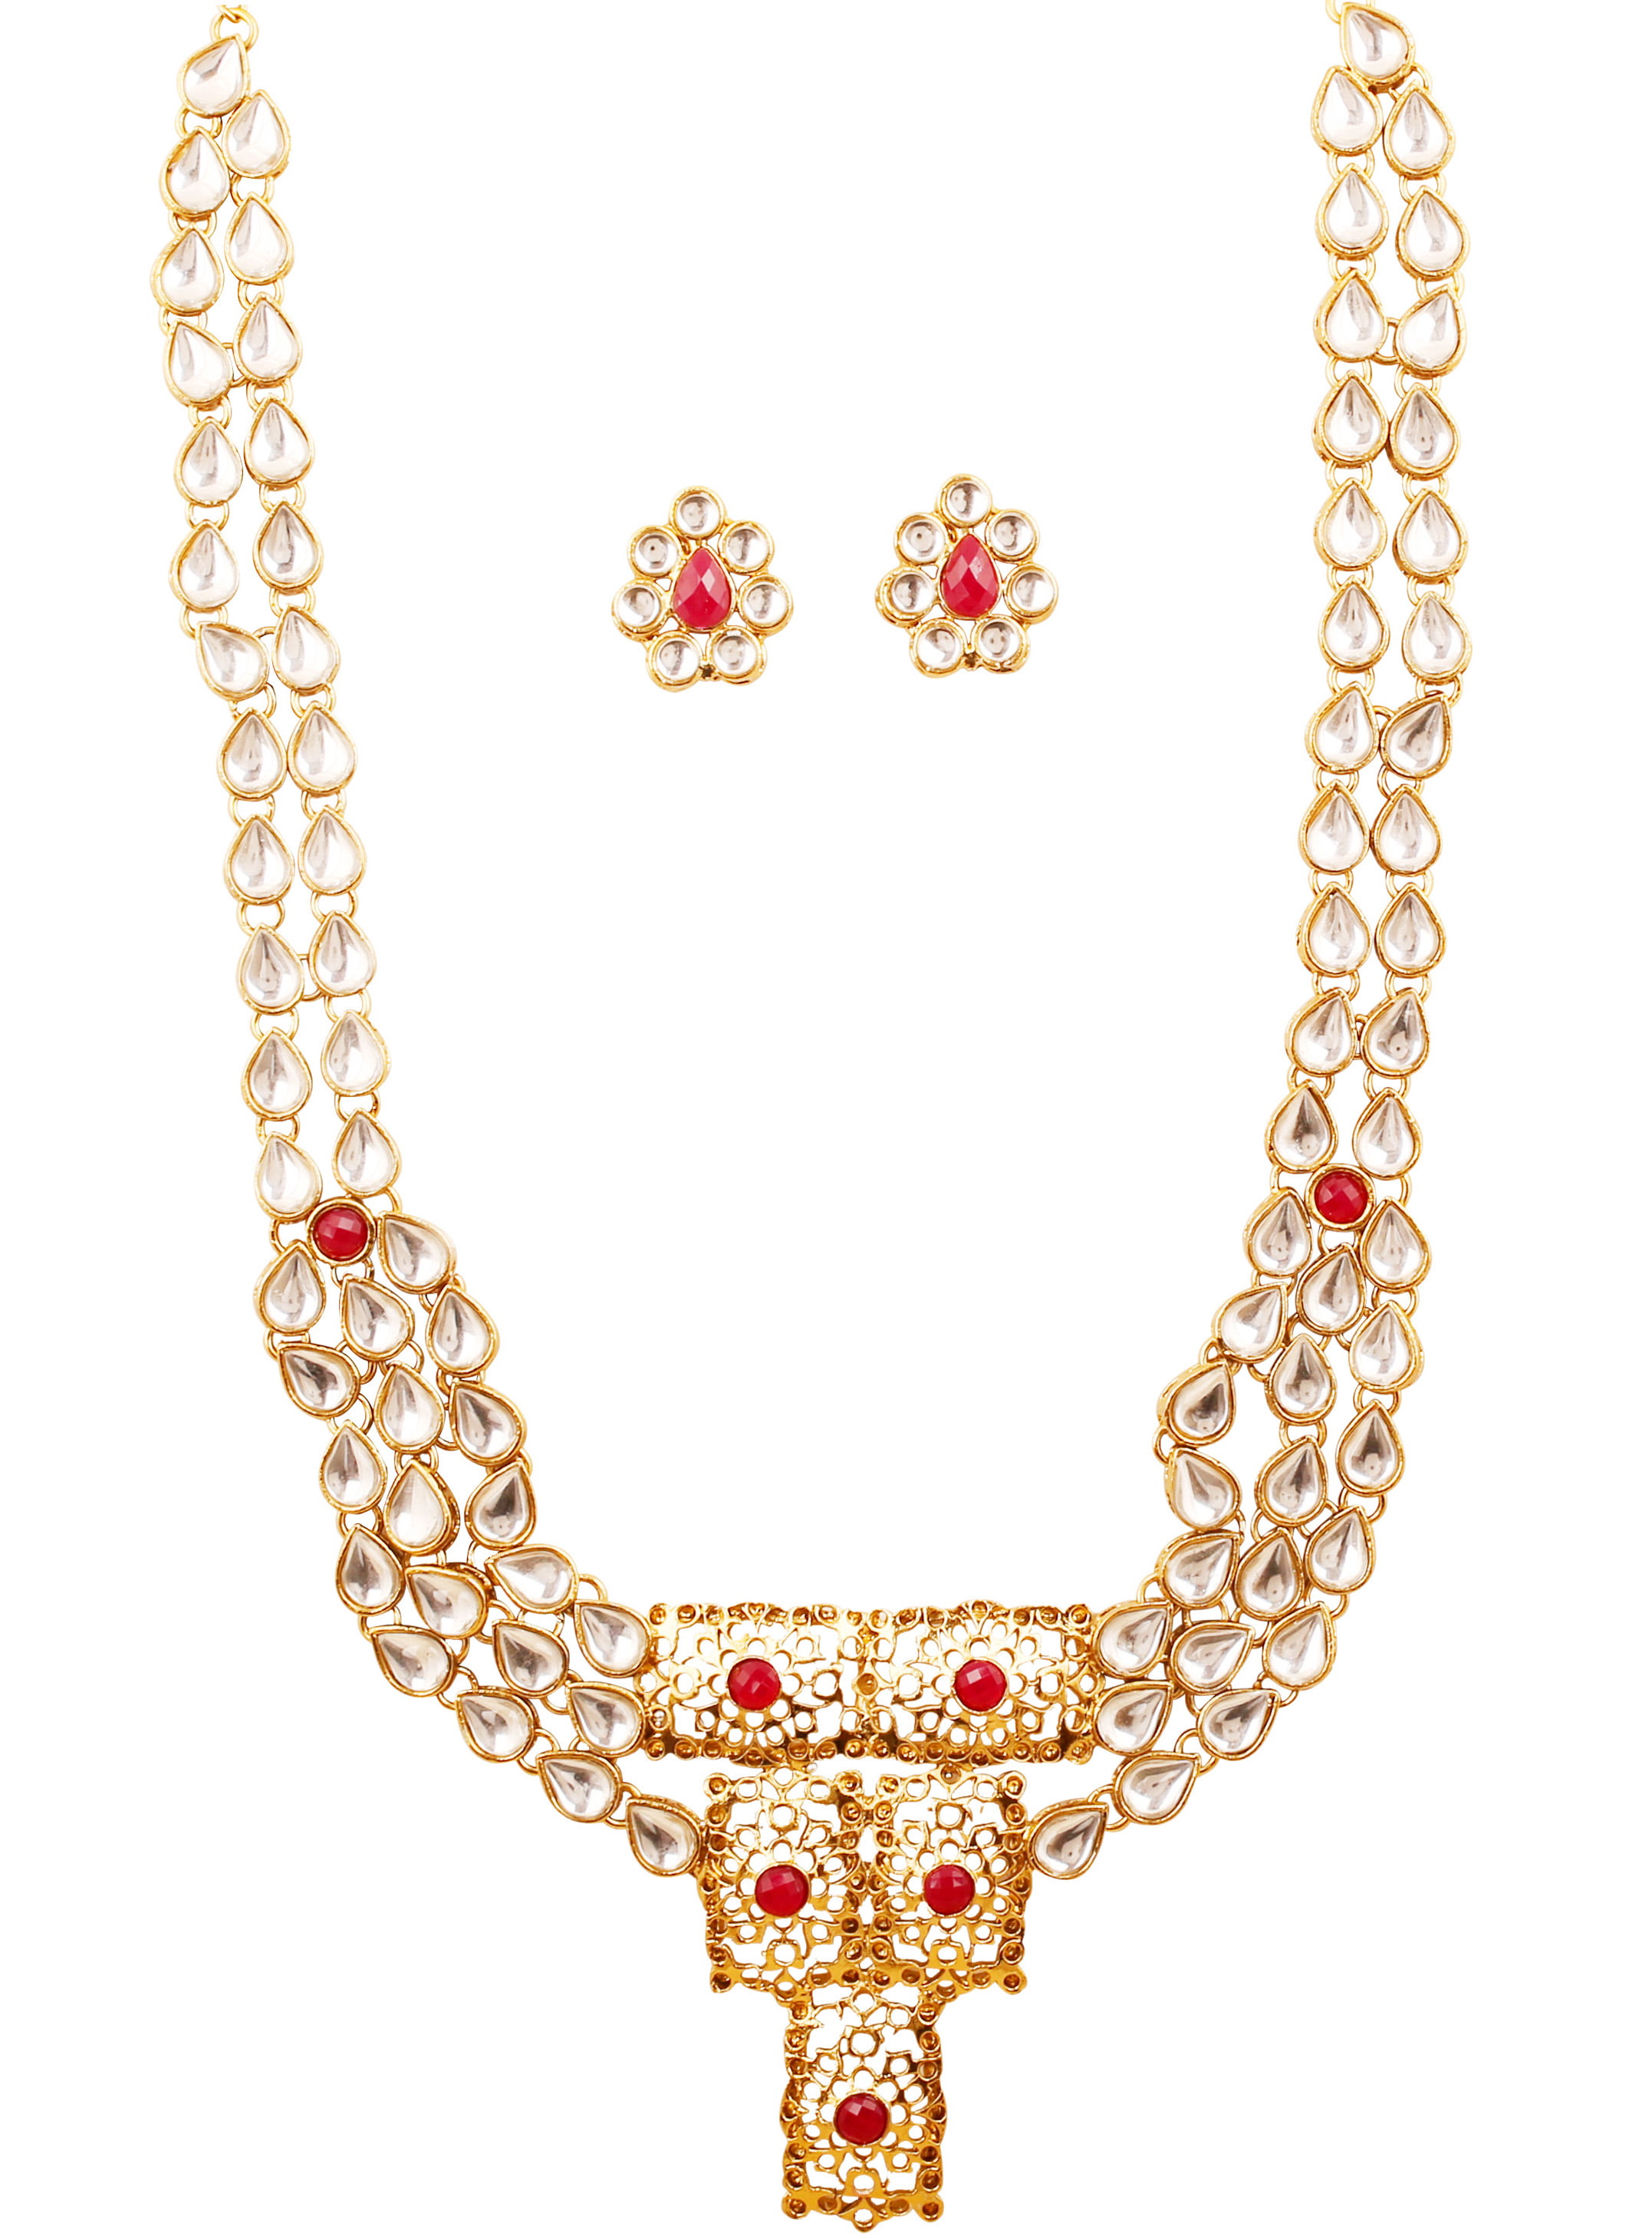 Touchstone Mughal Jali Collection White/red/Green Bridal Wedding Rani haar Necklace and Choker in Gold Tone for Women